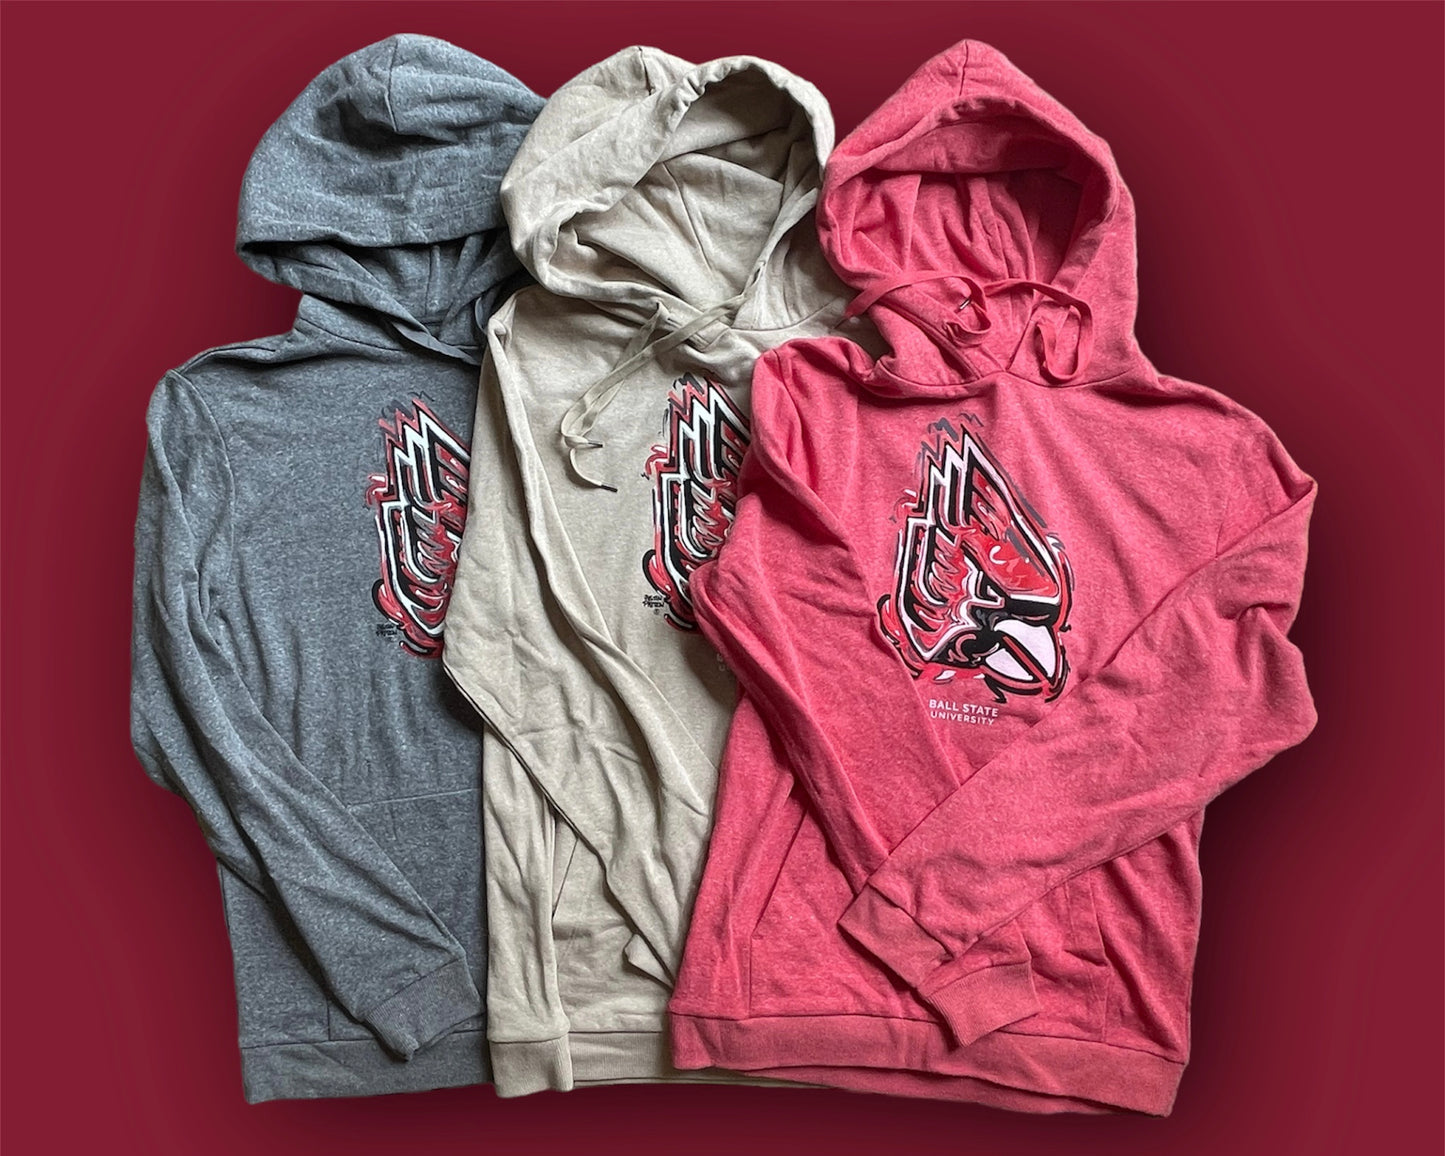 Ball State University Unisex Hoodie by Justin Patten (3 Colors)